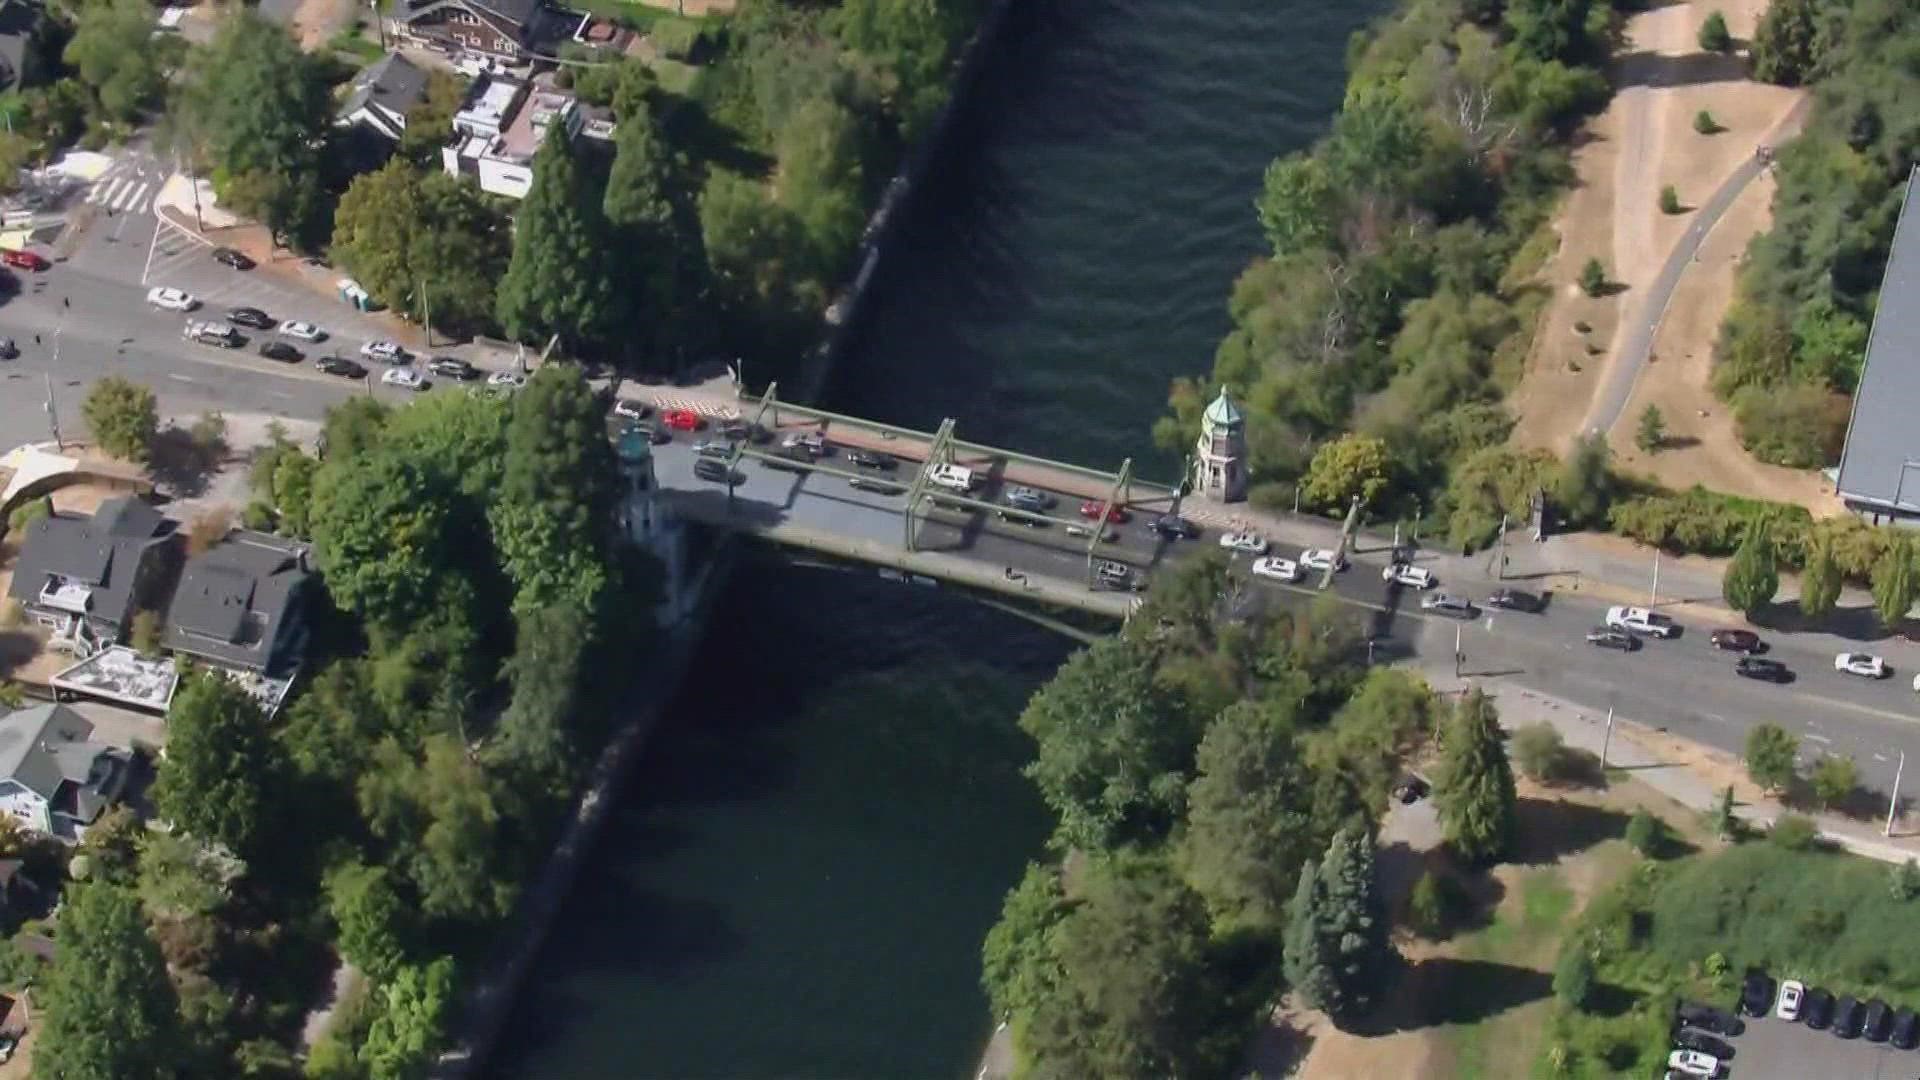 Montlake Bridge in Seattle will be closed in both directions this